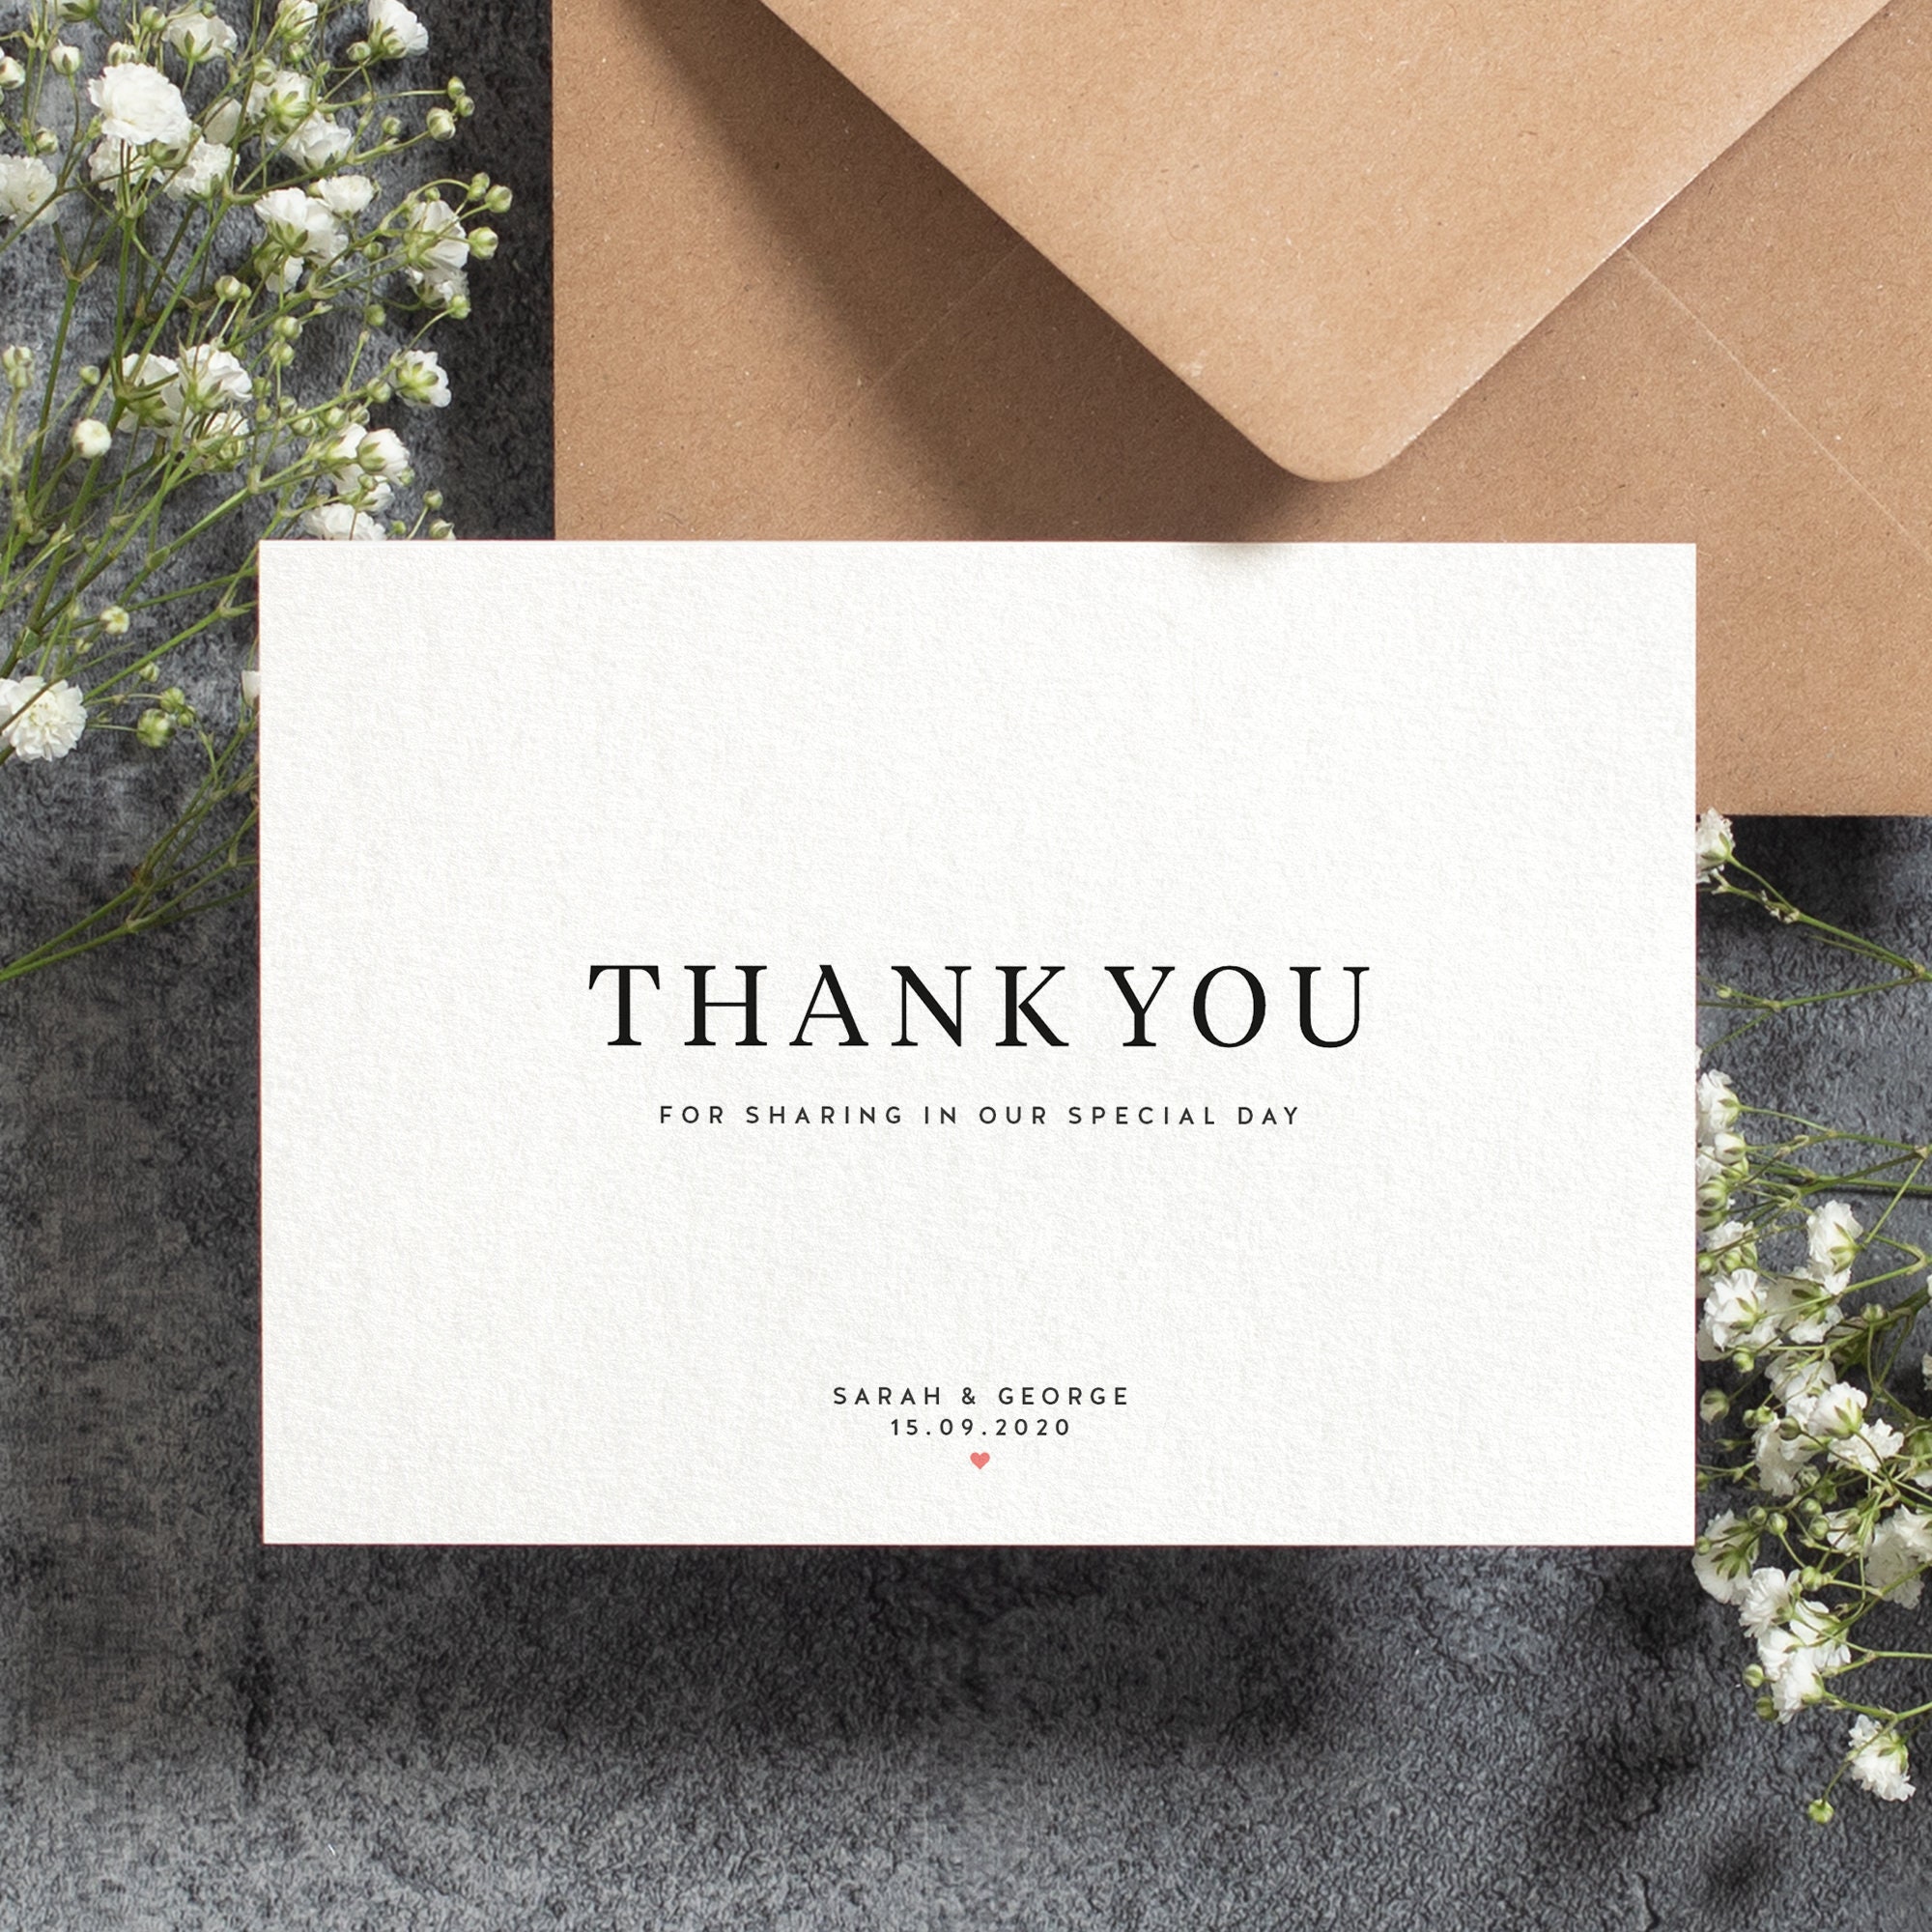 Premium POSTCARD Personalised Wedding Thank You Cards Includes Envs Photo 